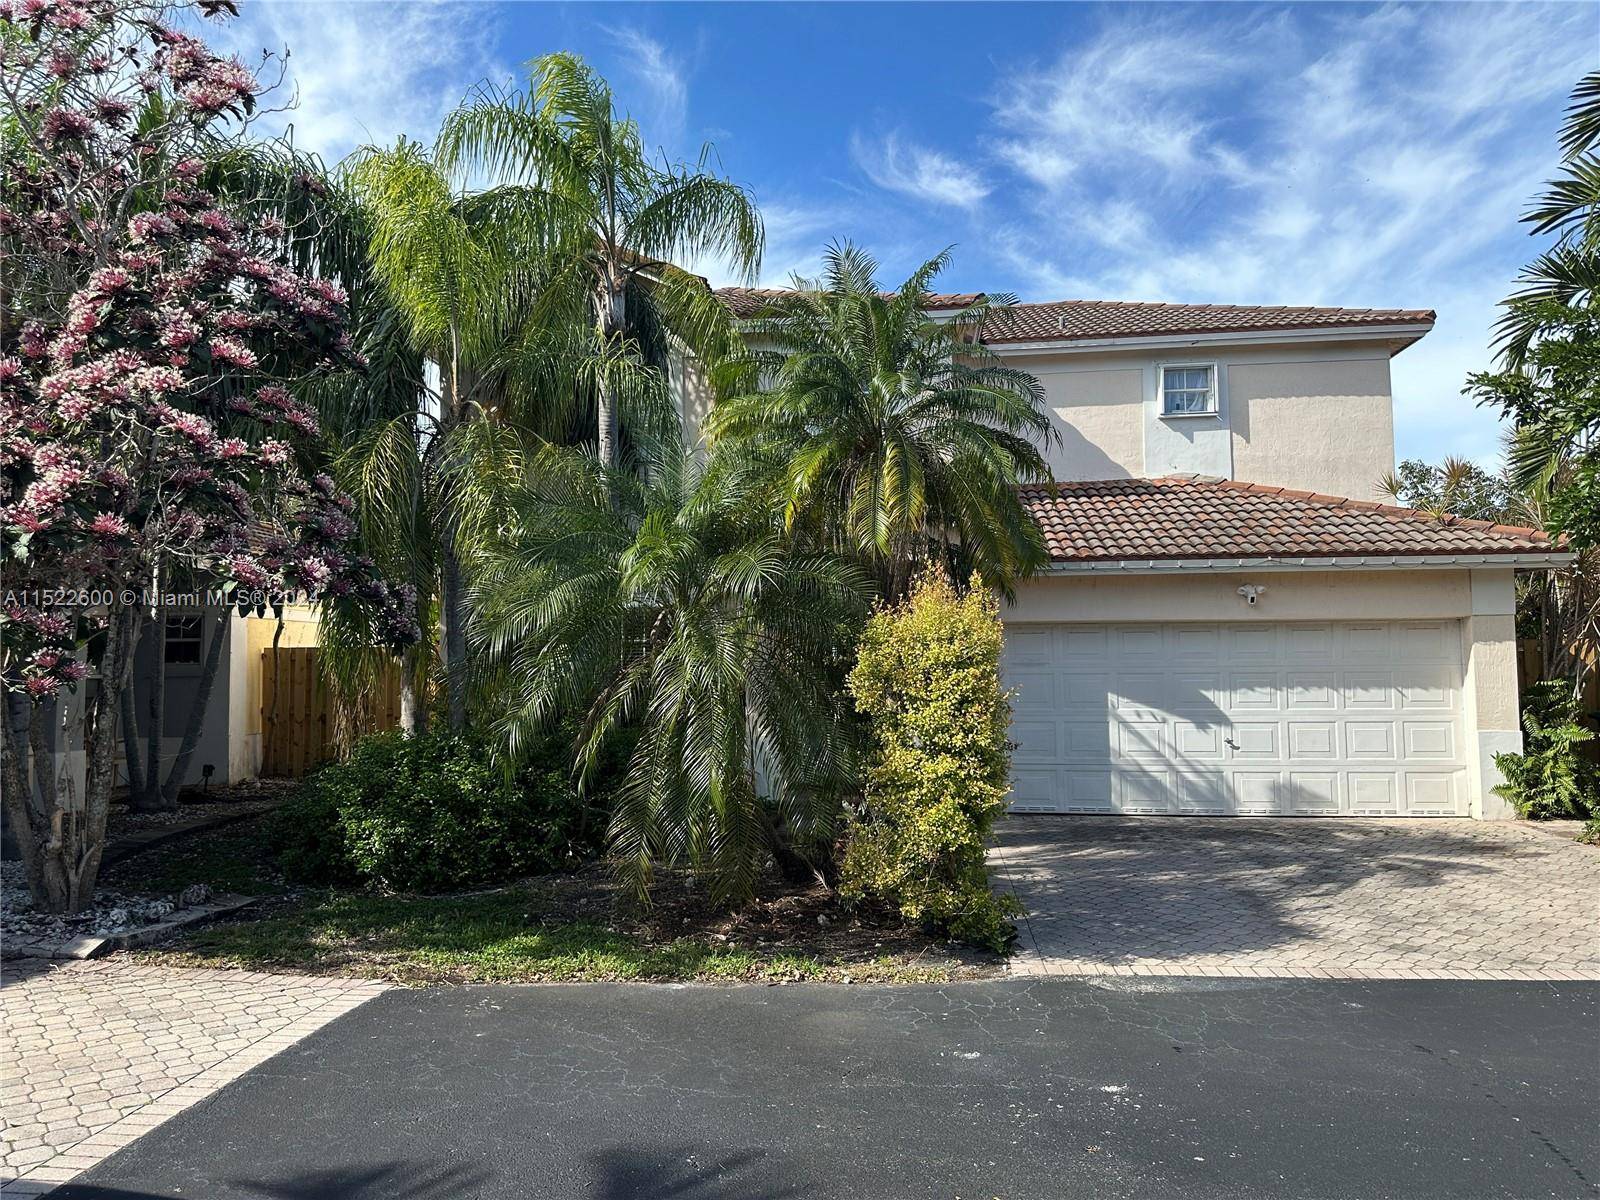 GREAT COMBINATION OF 4 BEDROOMS, 2 1 2 BATHS, 2 CAR GARAGE, TWO STORY HOME IN POPULAR MONTEREY LAKES AREA IN LAKES BY THE BAY EXTRA LARGE BACKYARD ROOM FOR ...